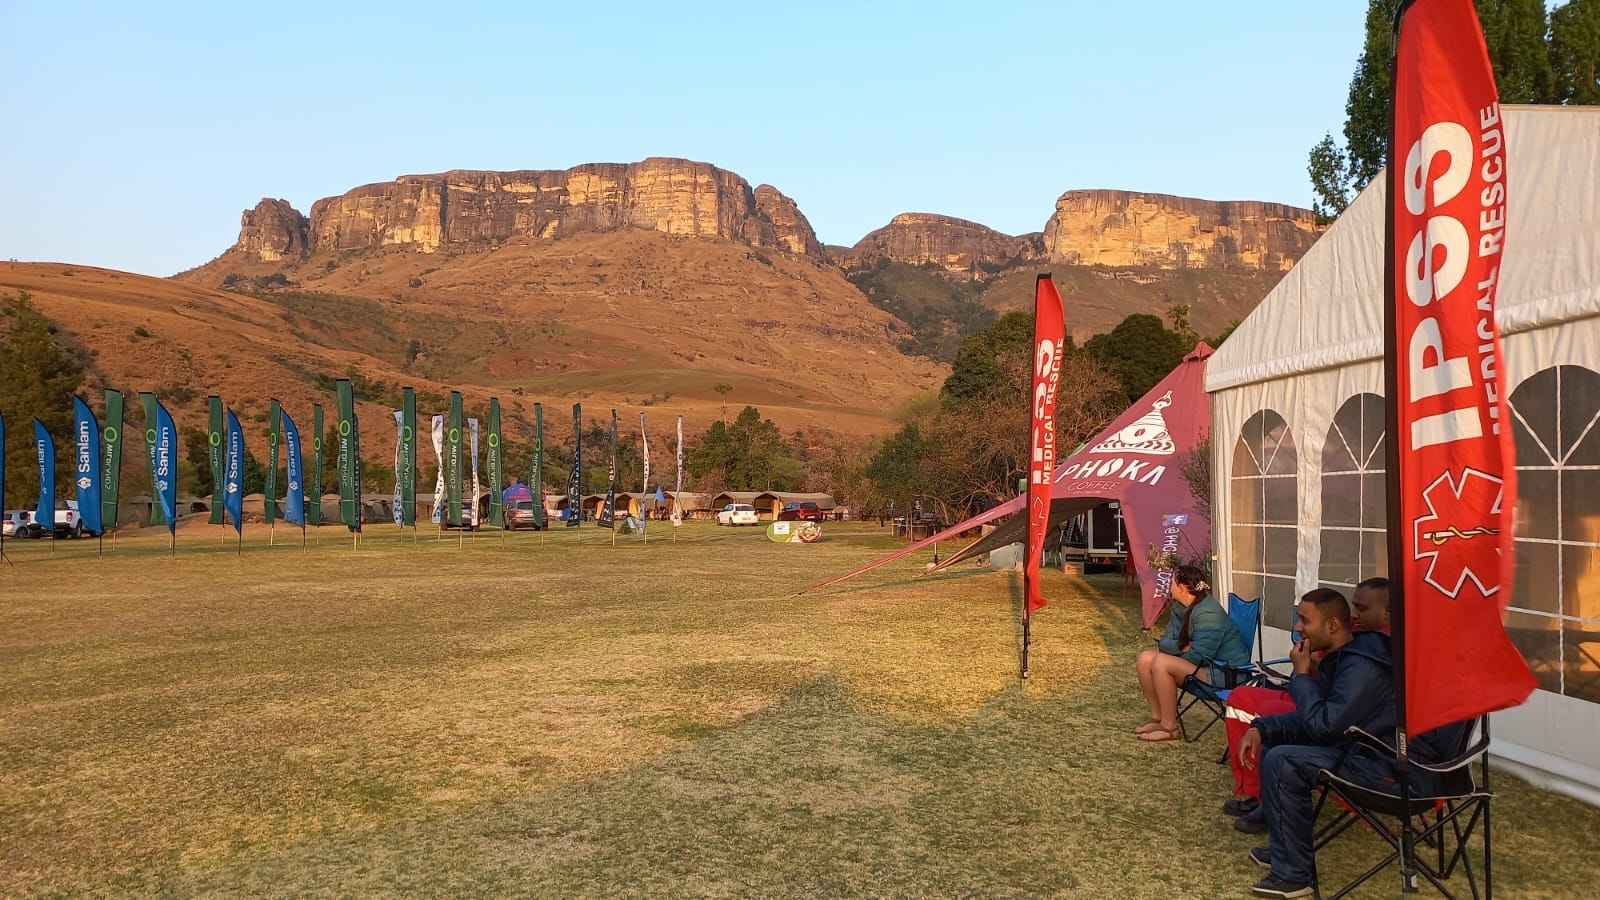 Mont-Aux-Sources Challenge being held in the Drakensberg